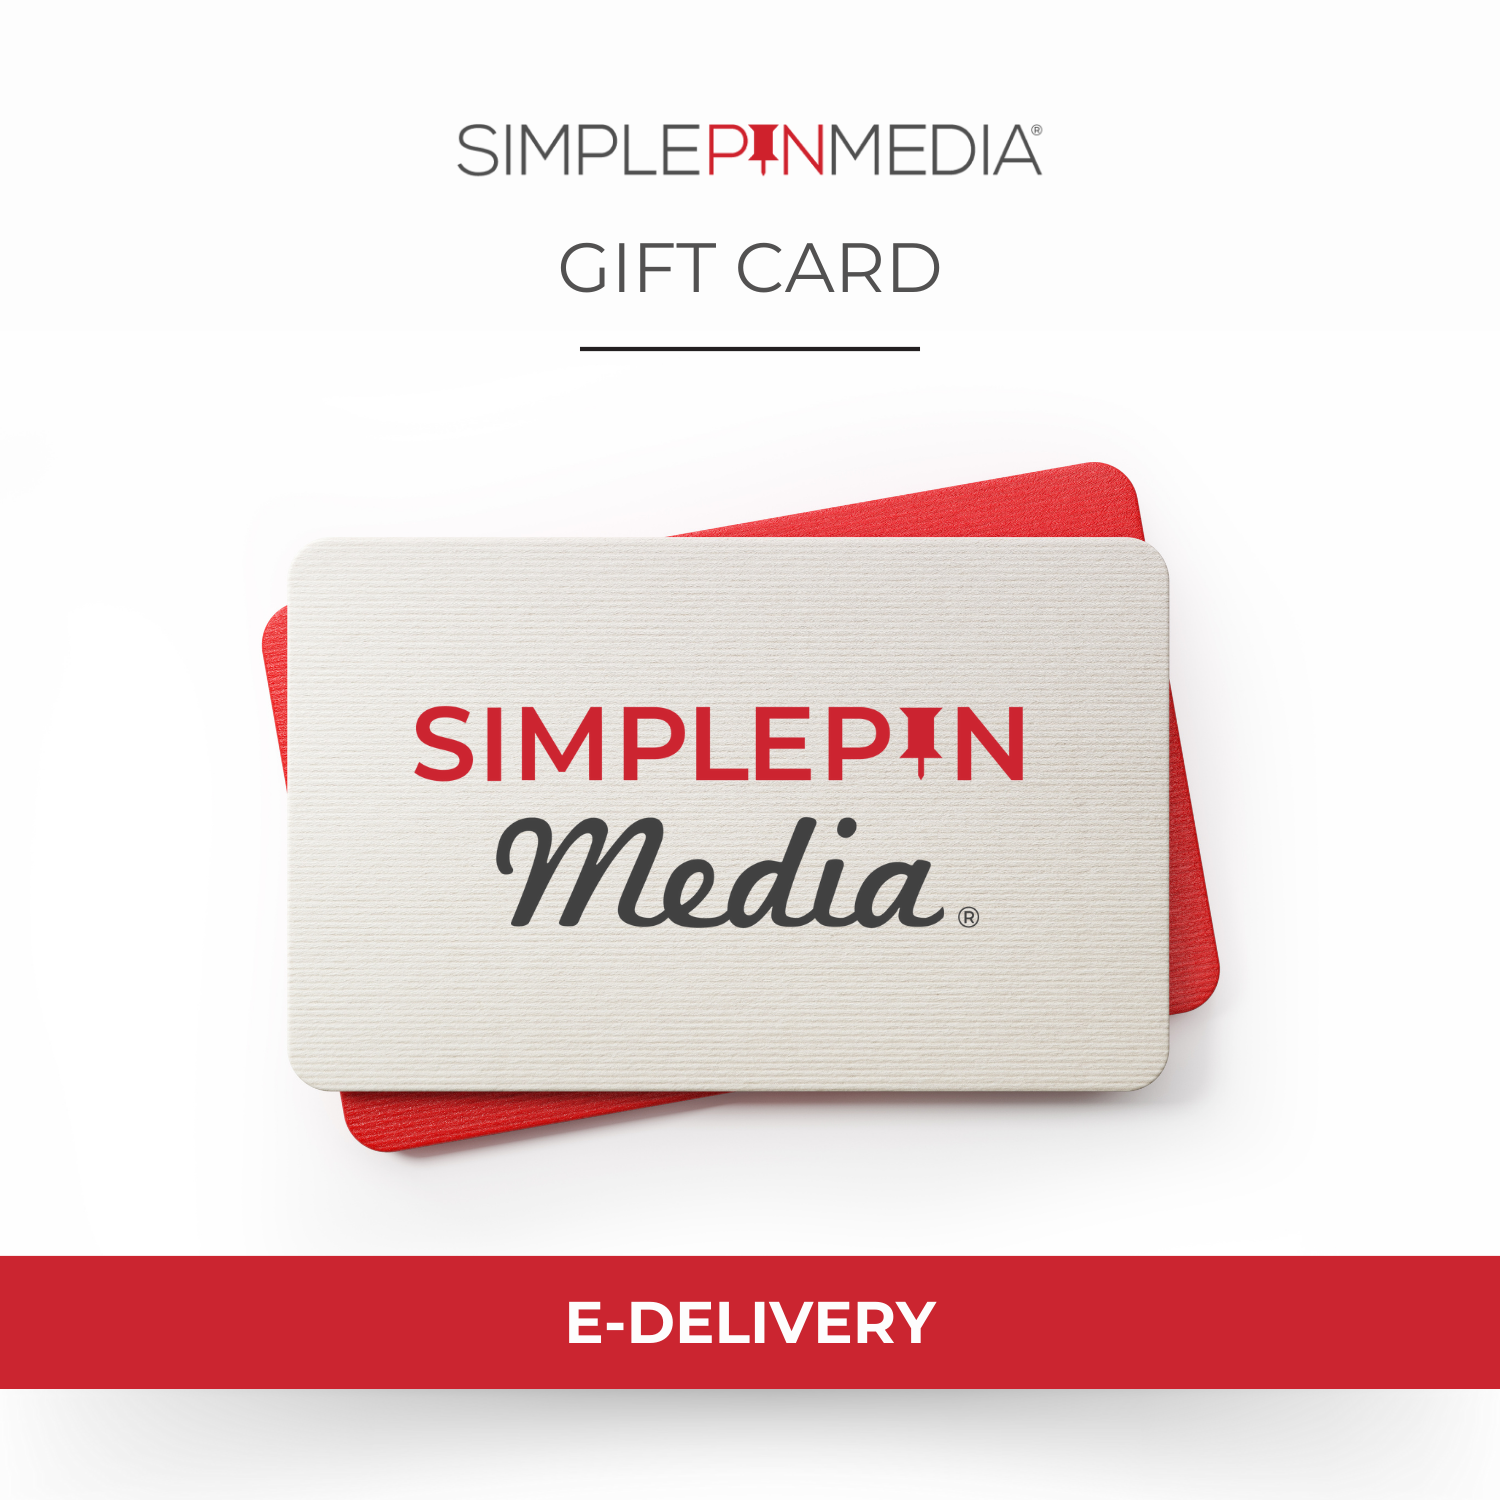 Pin on Gift Card